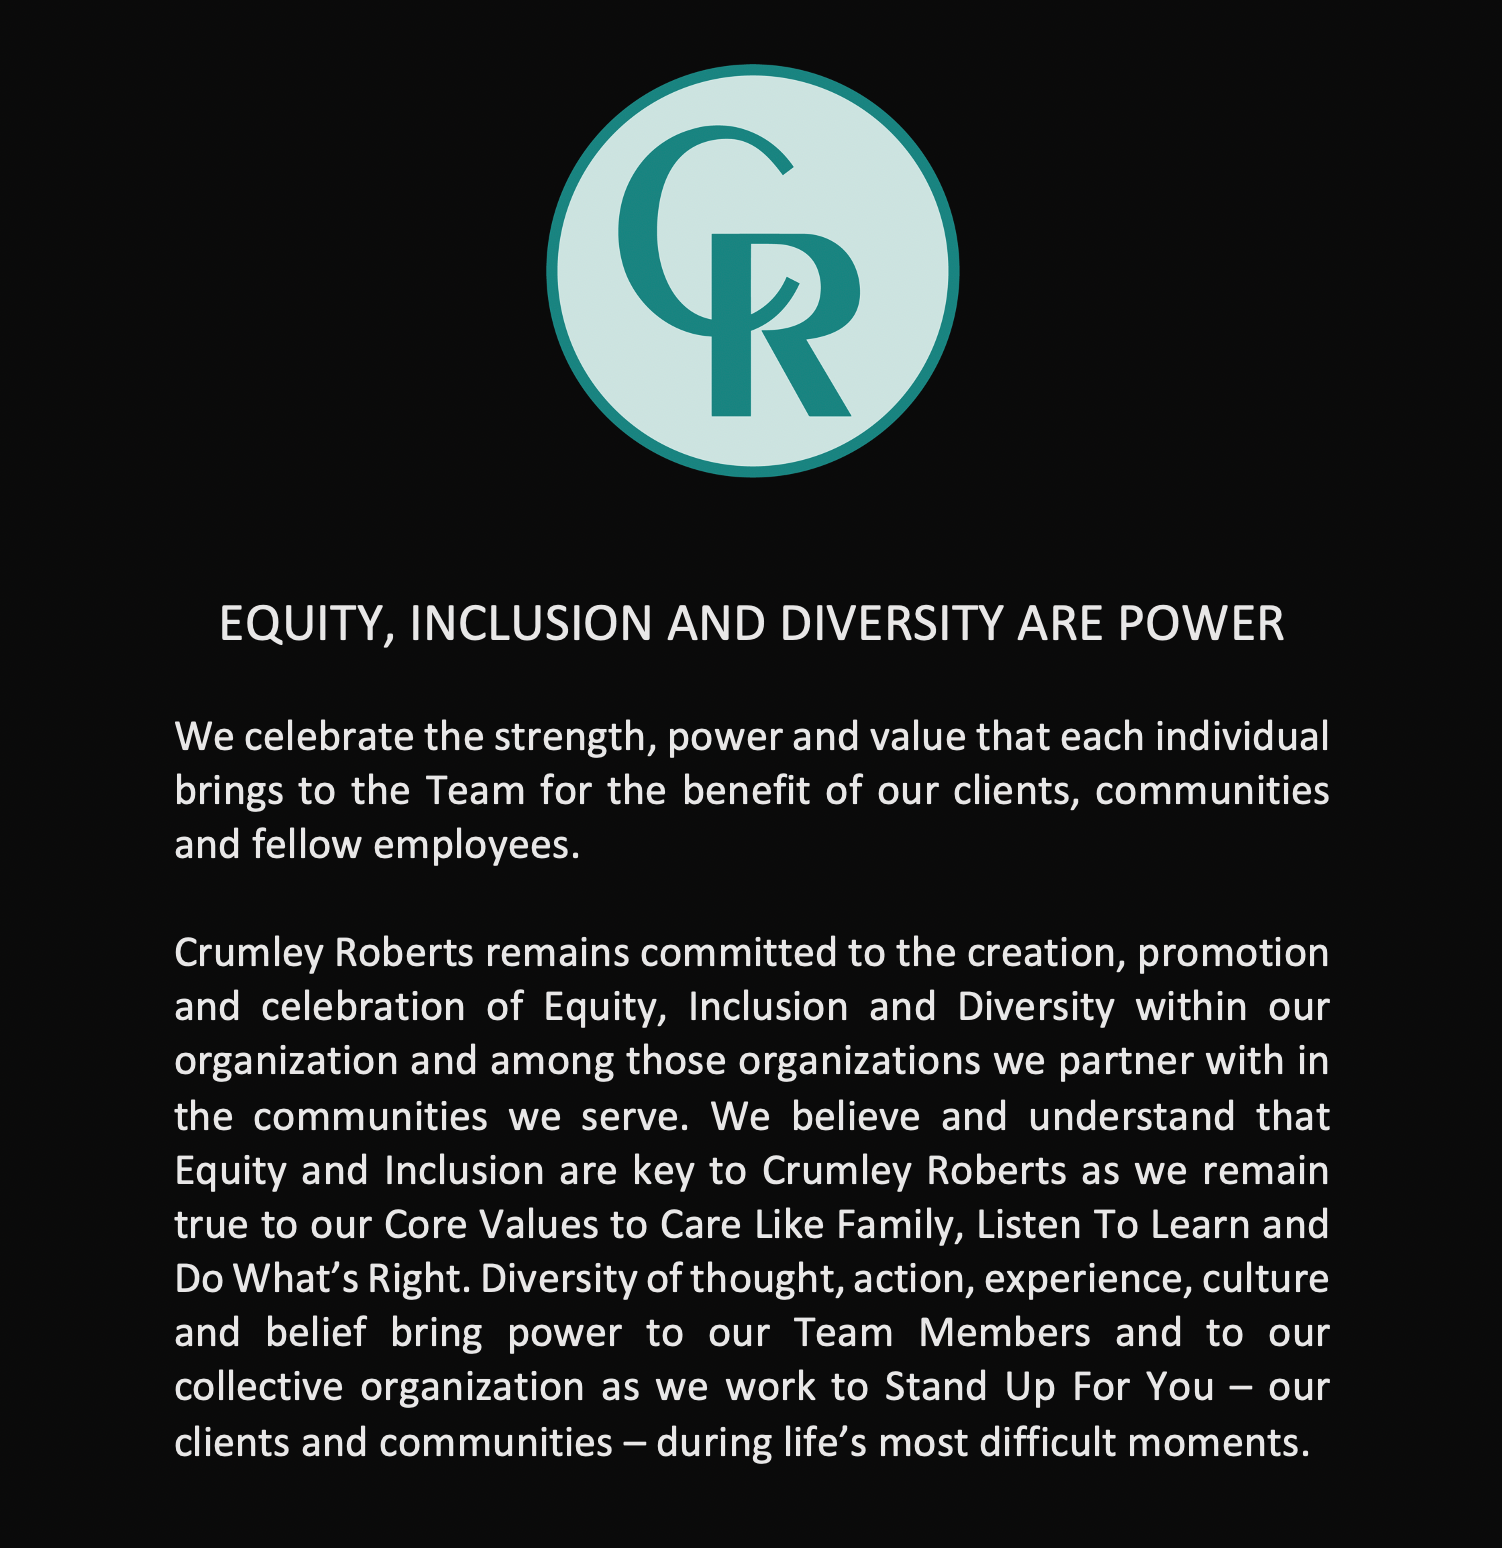 CR Equity, Inclusion and Diversity Statement